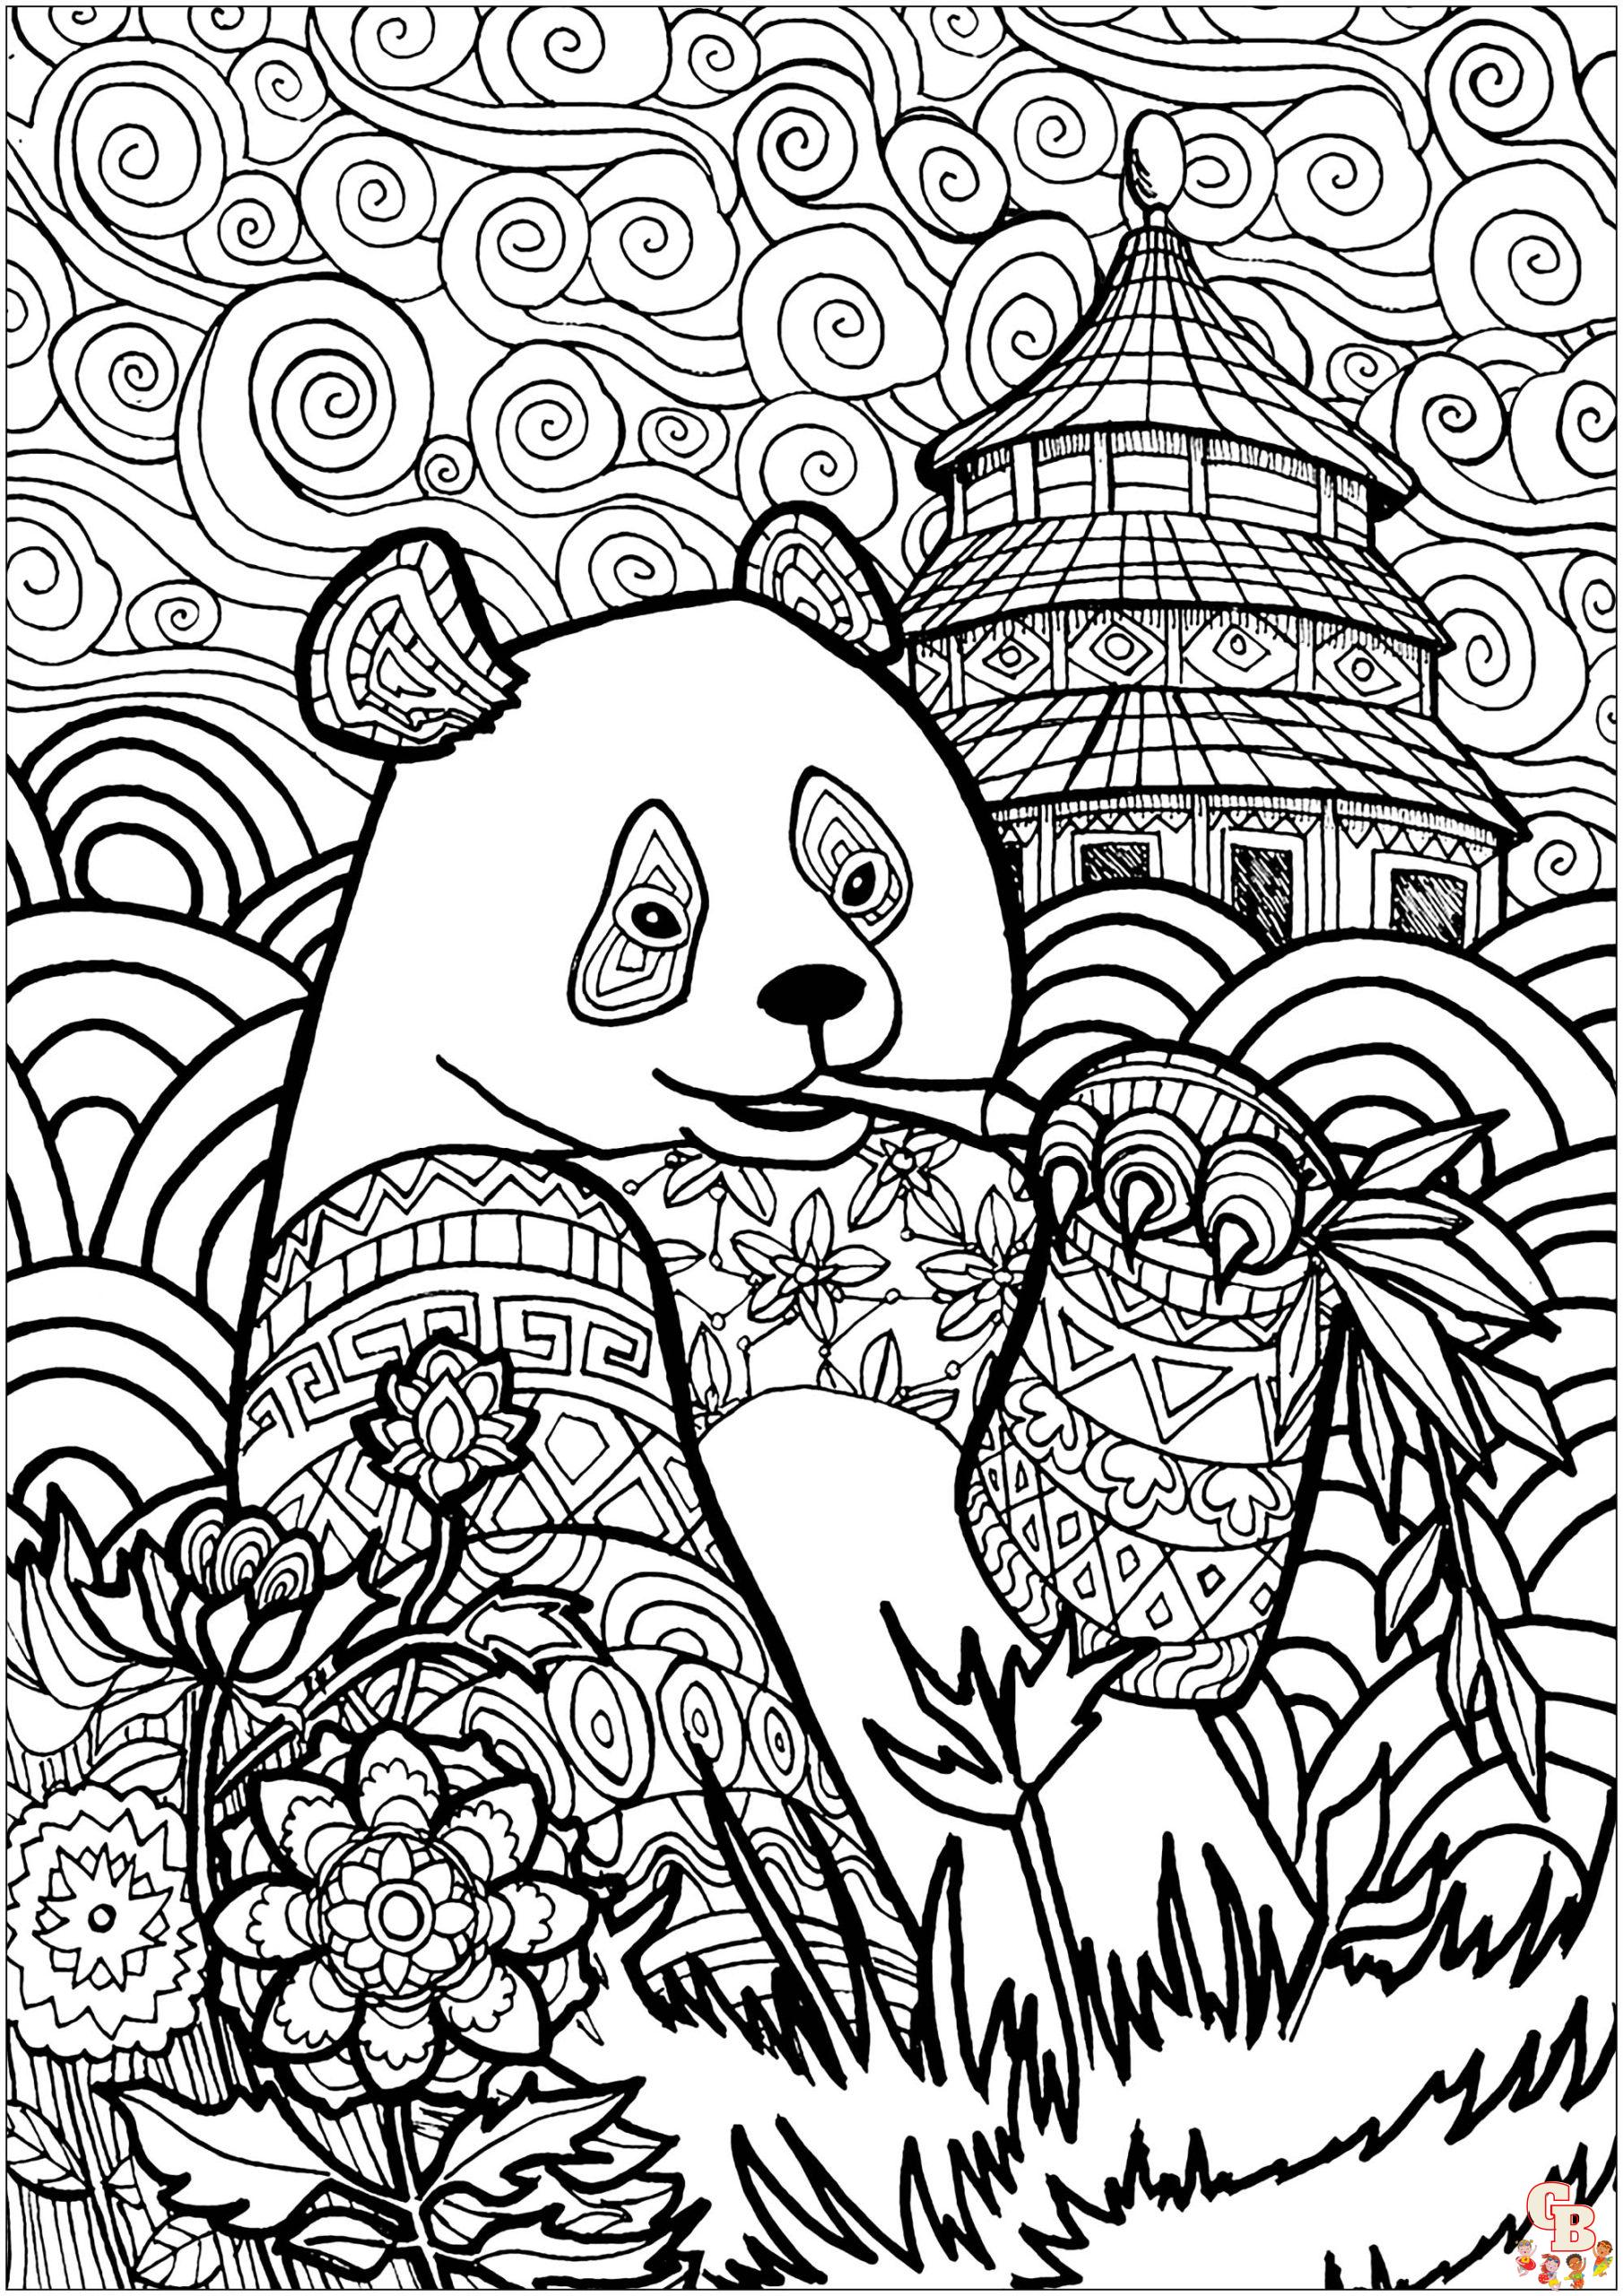 Coloriage Chine